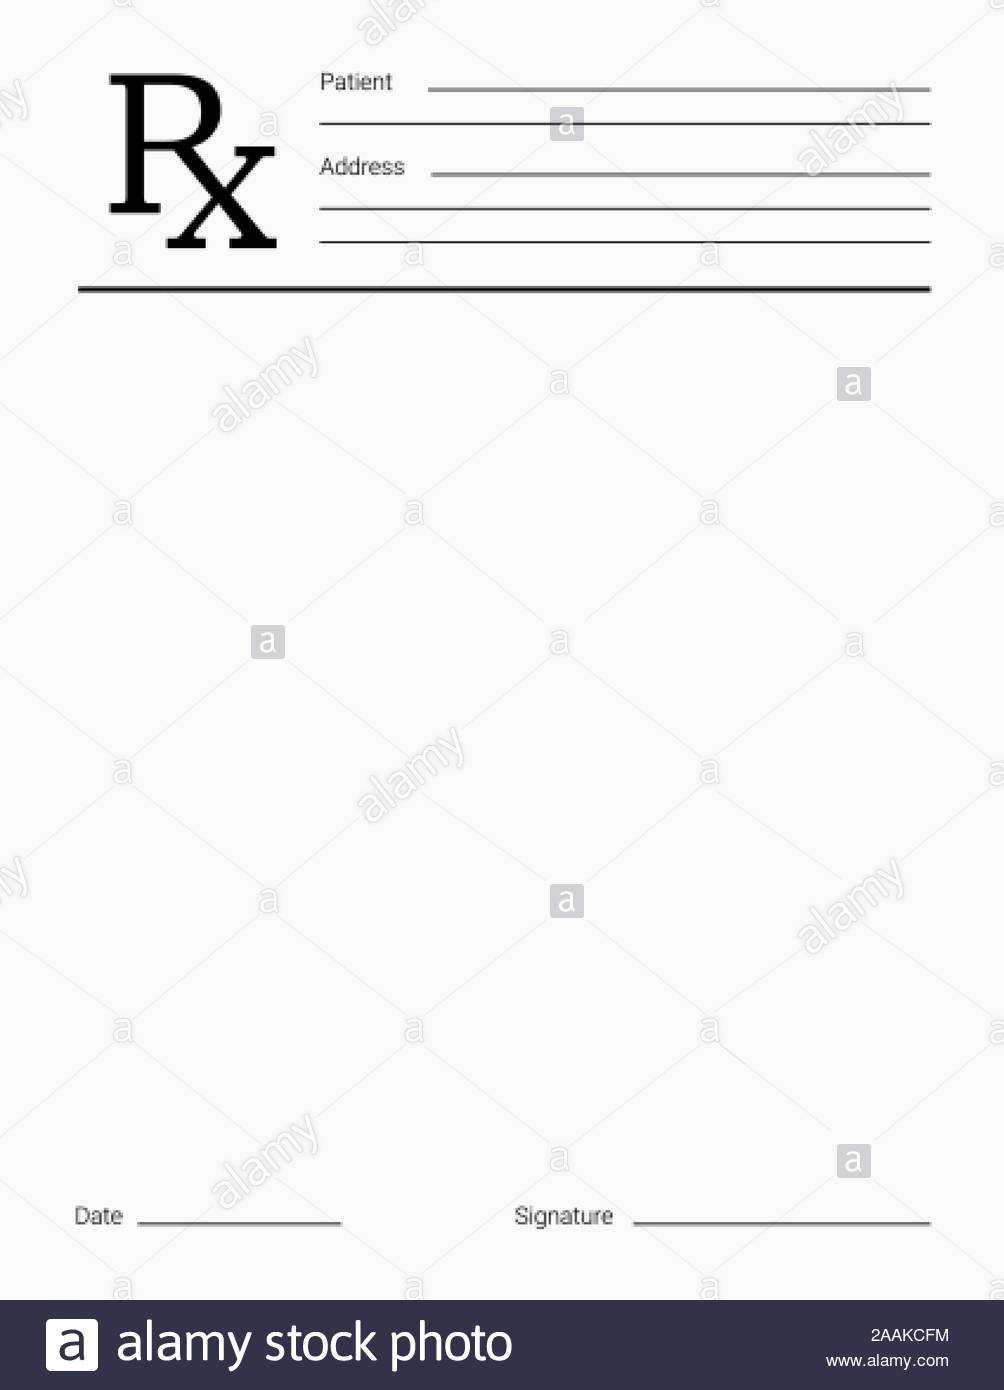 Doctor's Rx Pad Template. Blank Medical Prescription Form Throughout Blank Prescription Pad Template